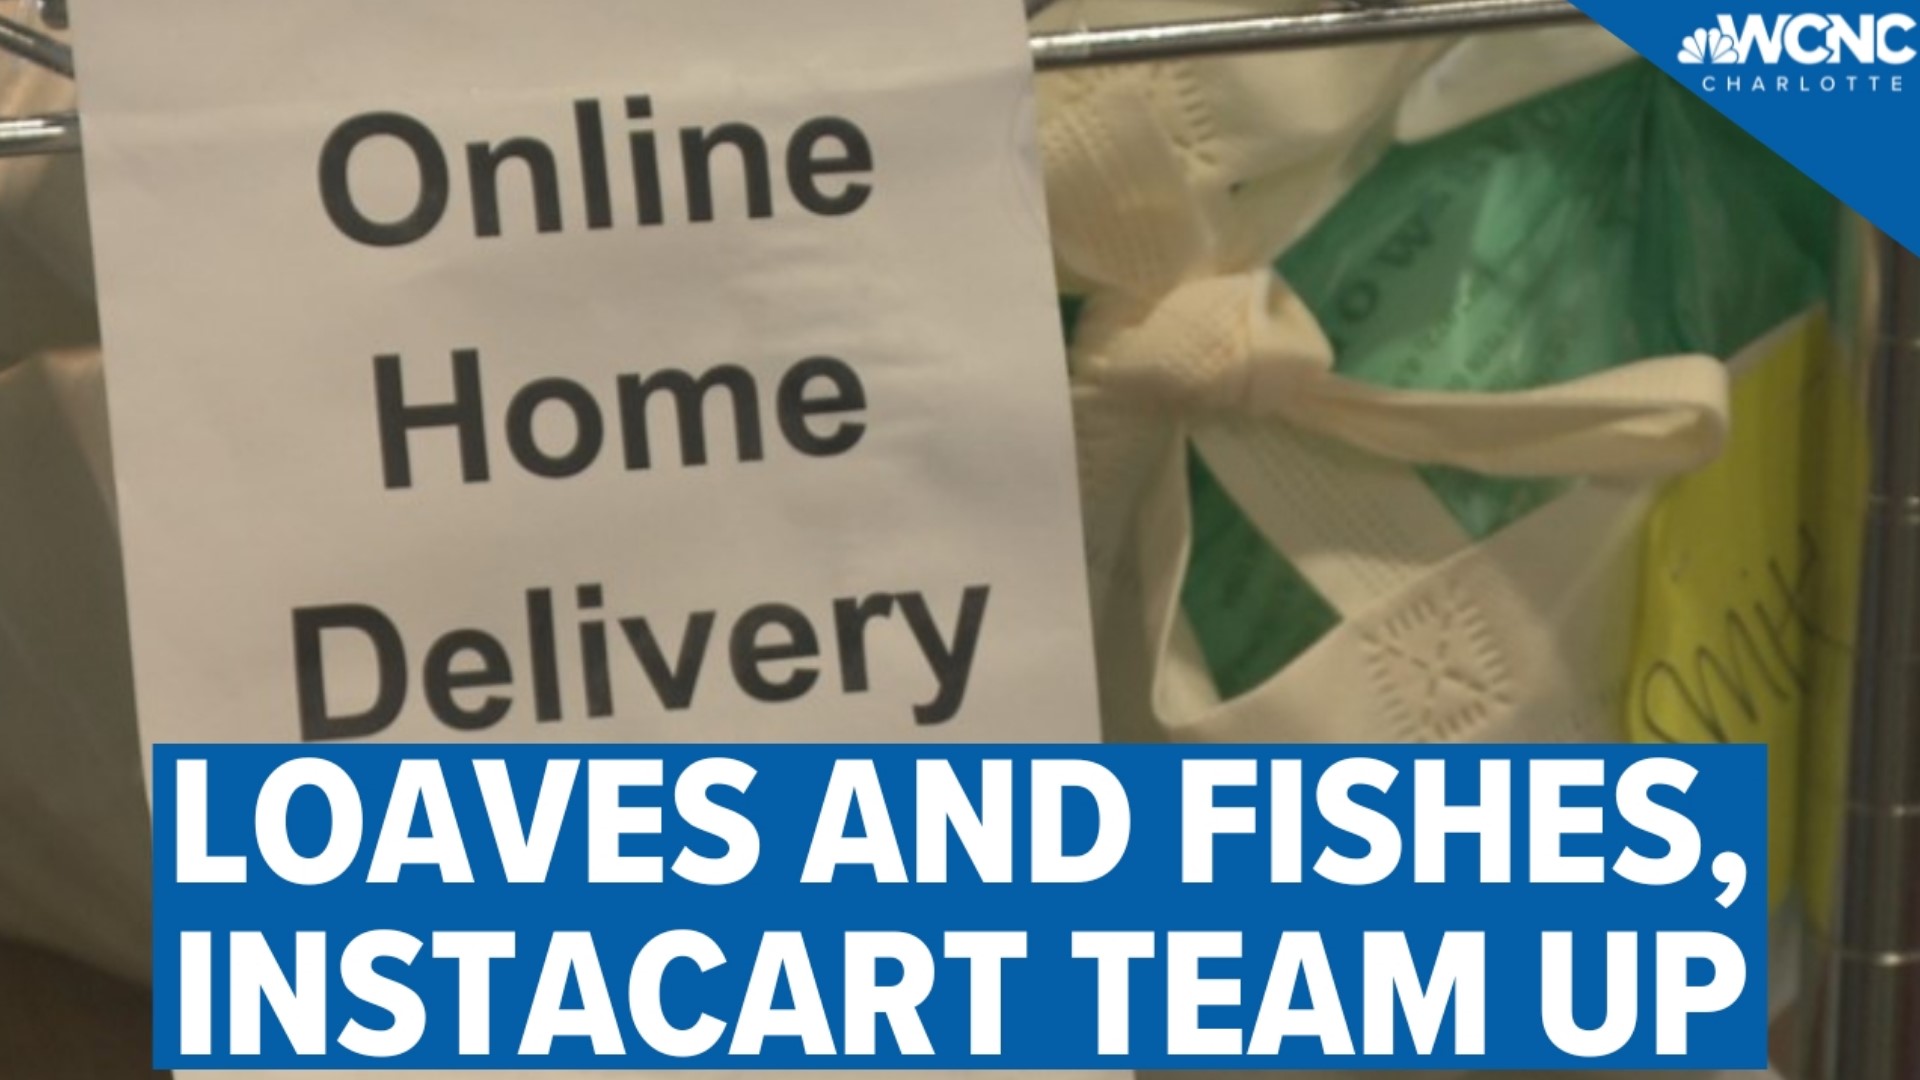 Grocery delivery started in 2020 for Loaves & Fishes as a pandemic pivot, but it's become clear from demand, the service is the way of the future.